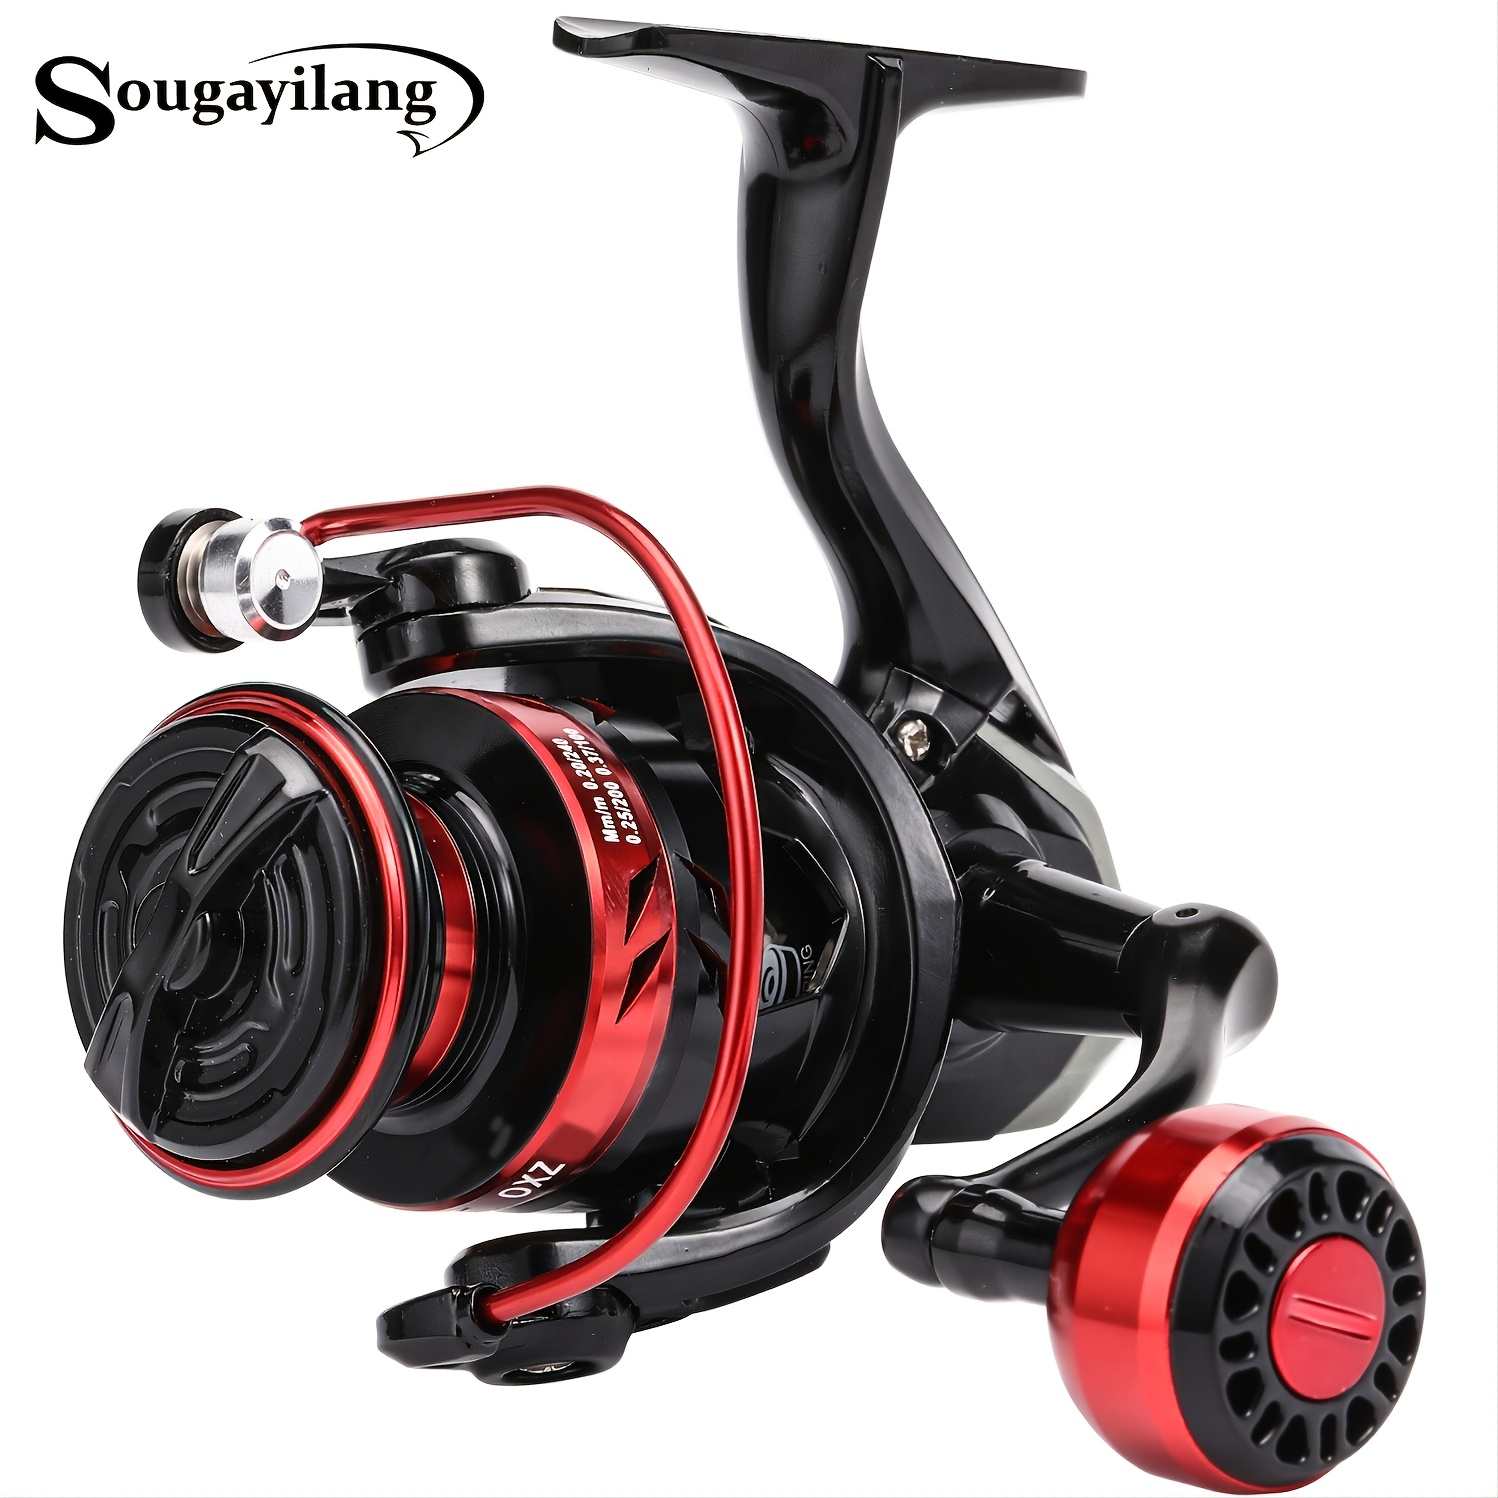 Sougayilang Ultralight Spinning Reel for Saltwater and Freshwater Fishing -  Smooth and Durable Fishing Wheel